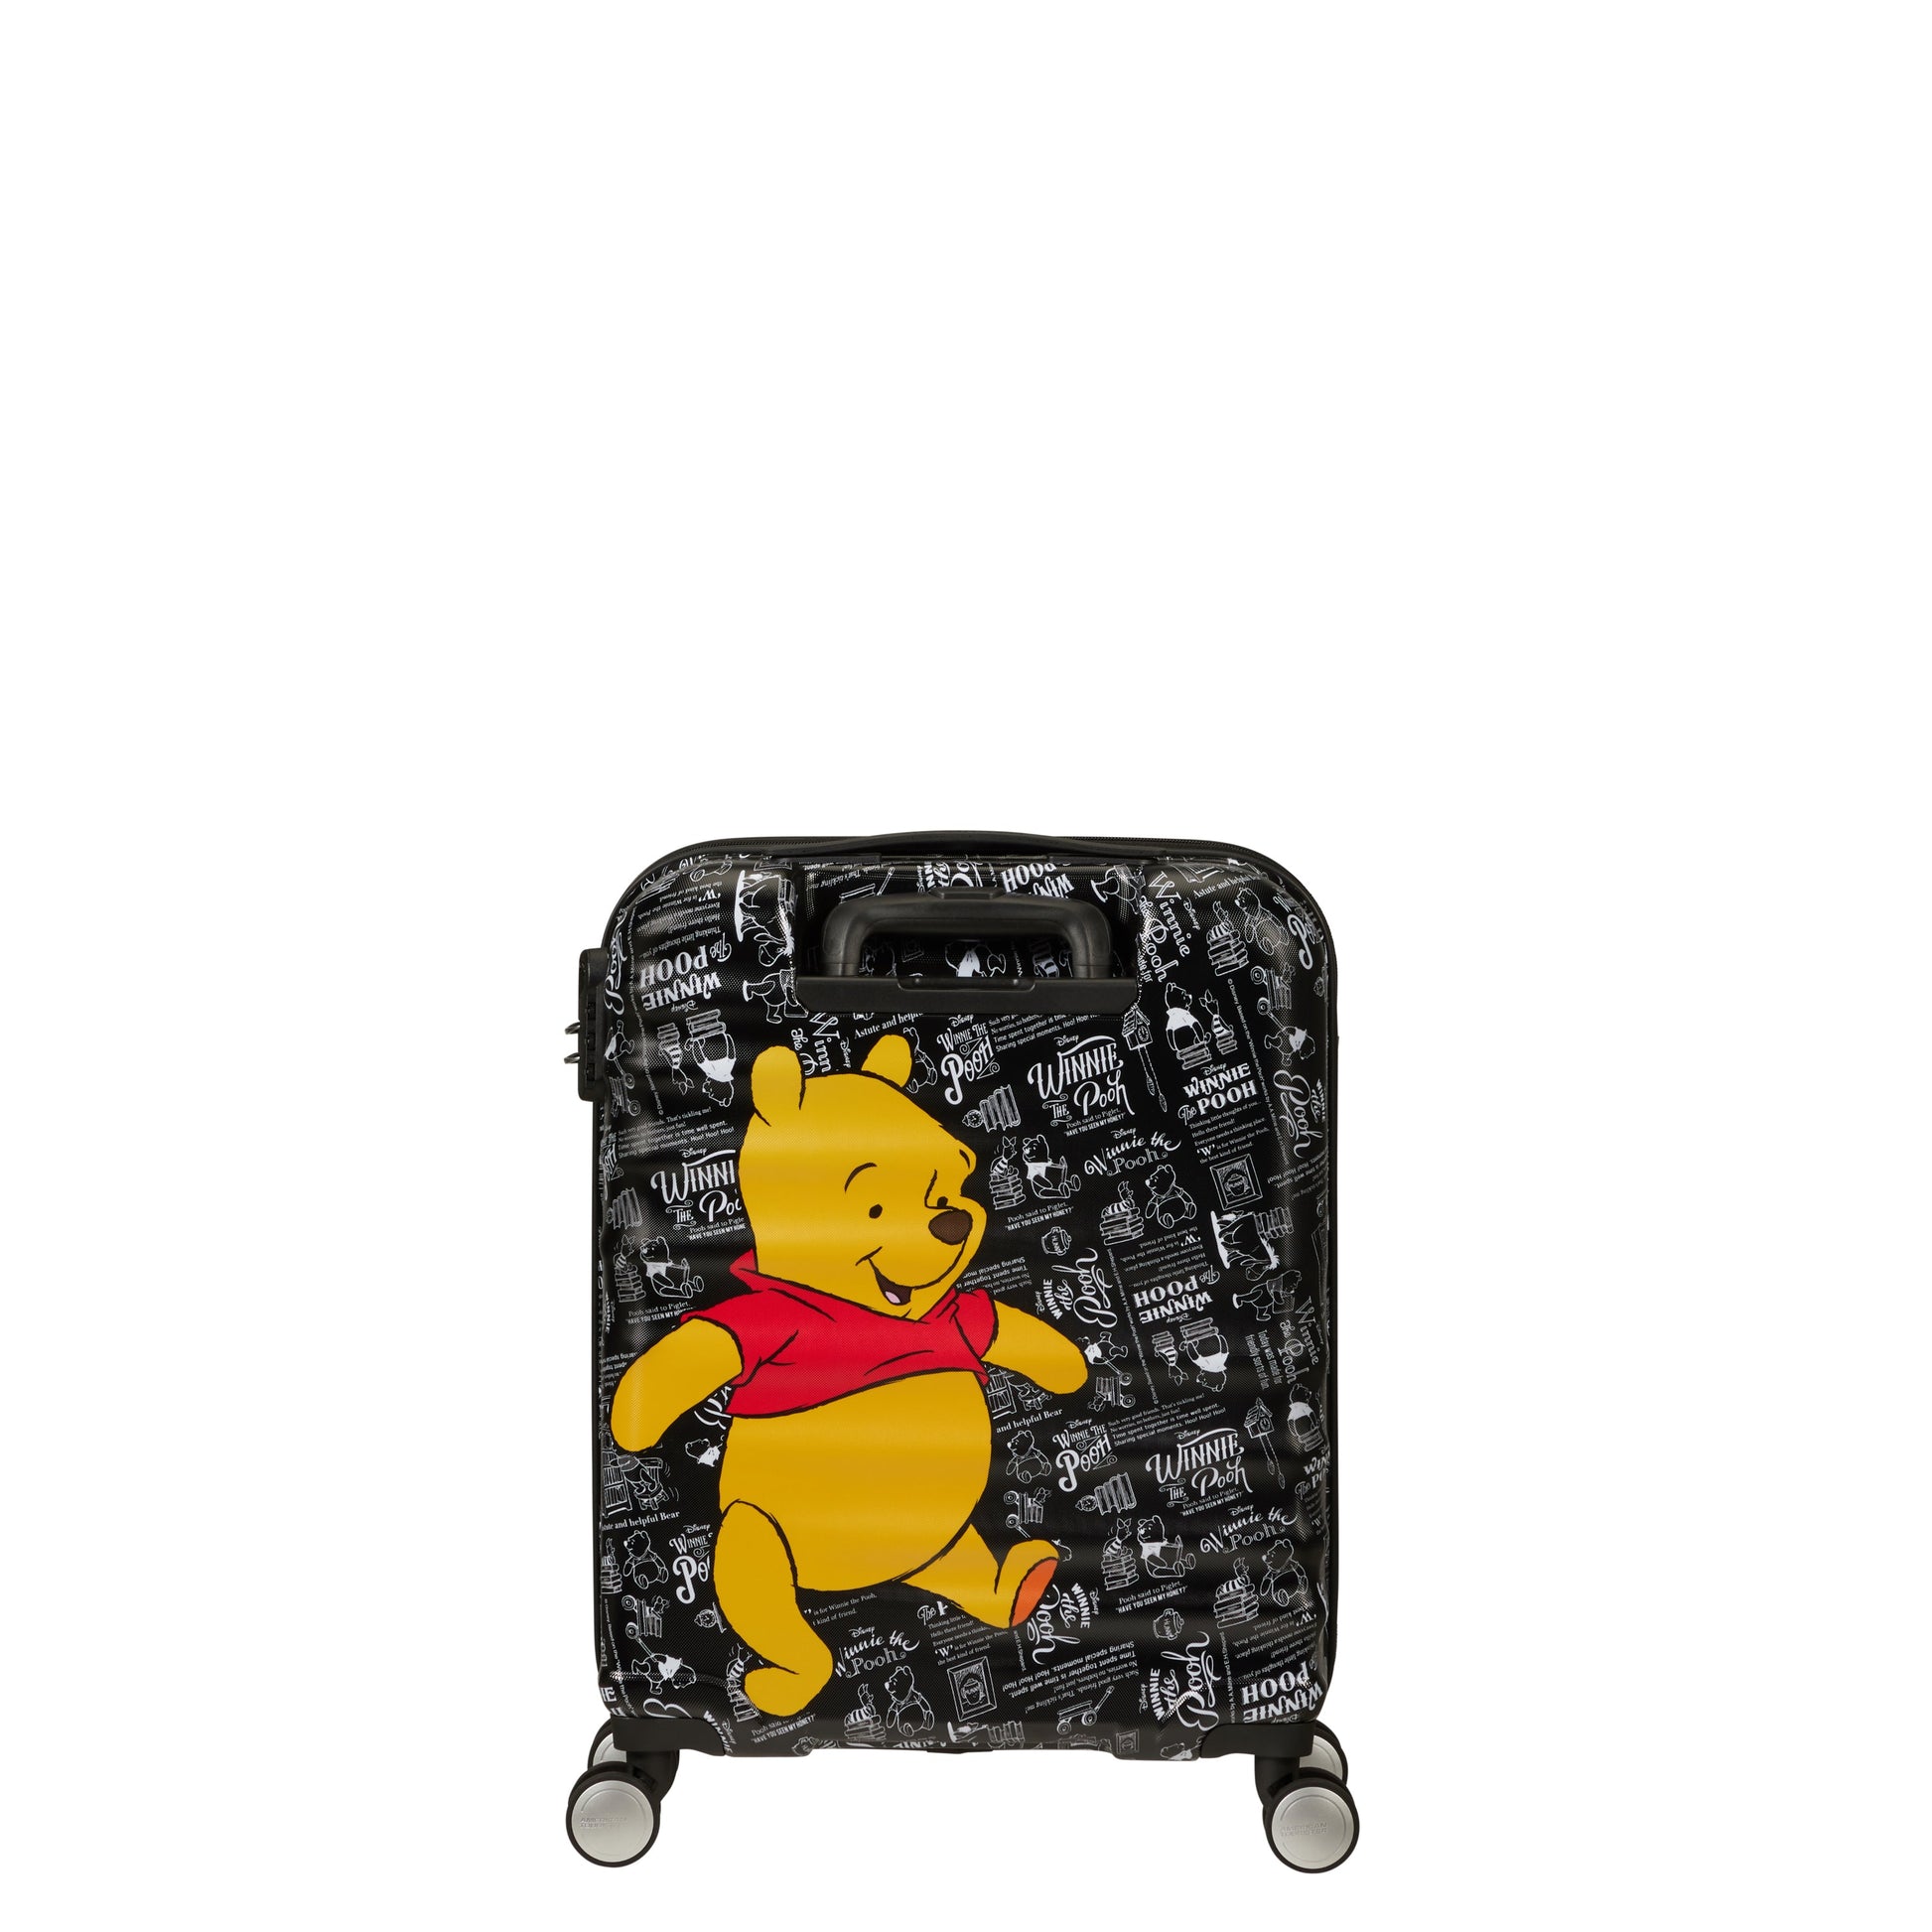 American Tourister Disney Wavebreaker Spinner Carry-On Luggage - Winnie The Pooh